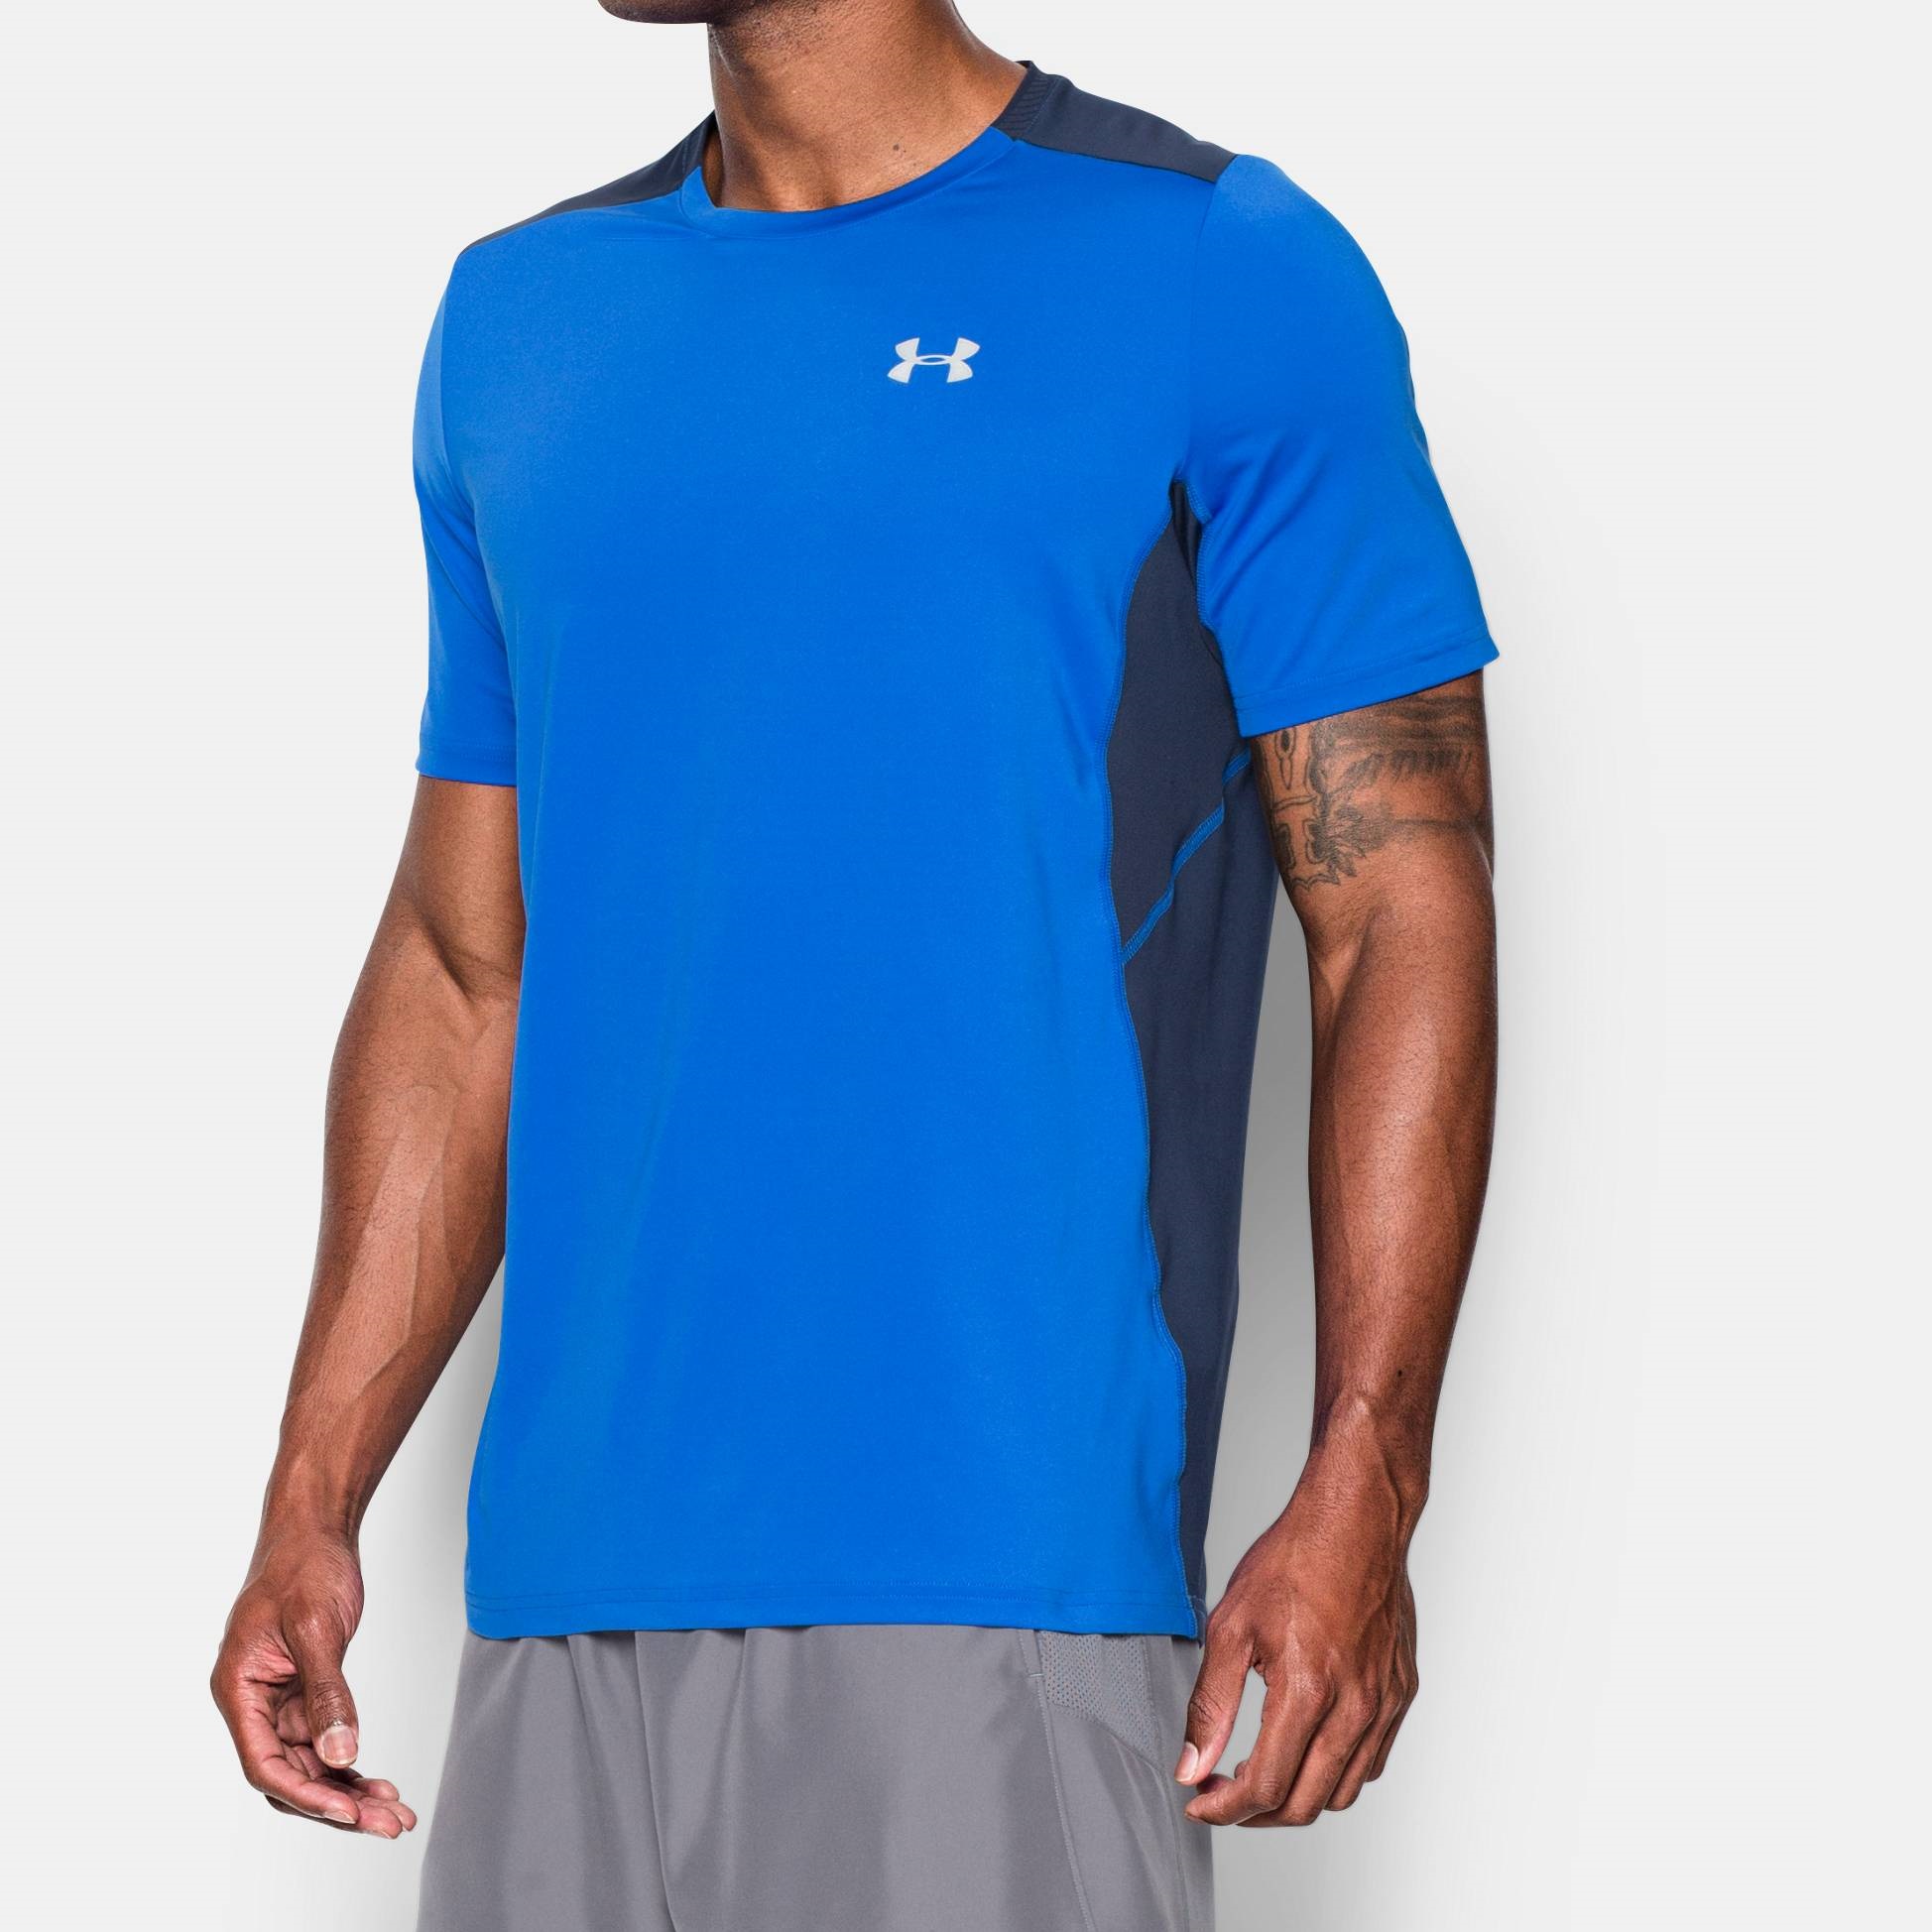  -  under armour CoolSwitch Running Shirt